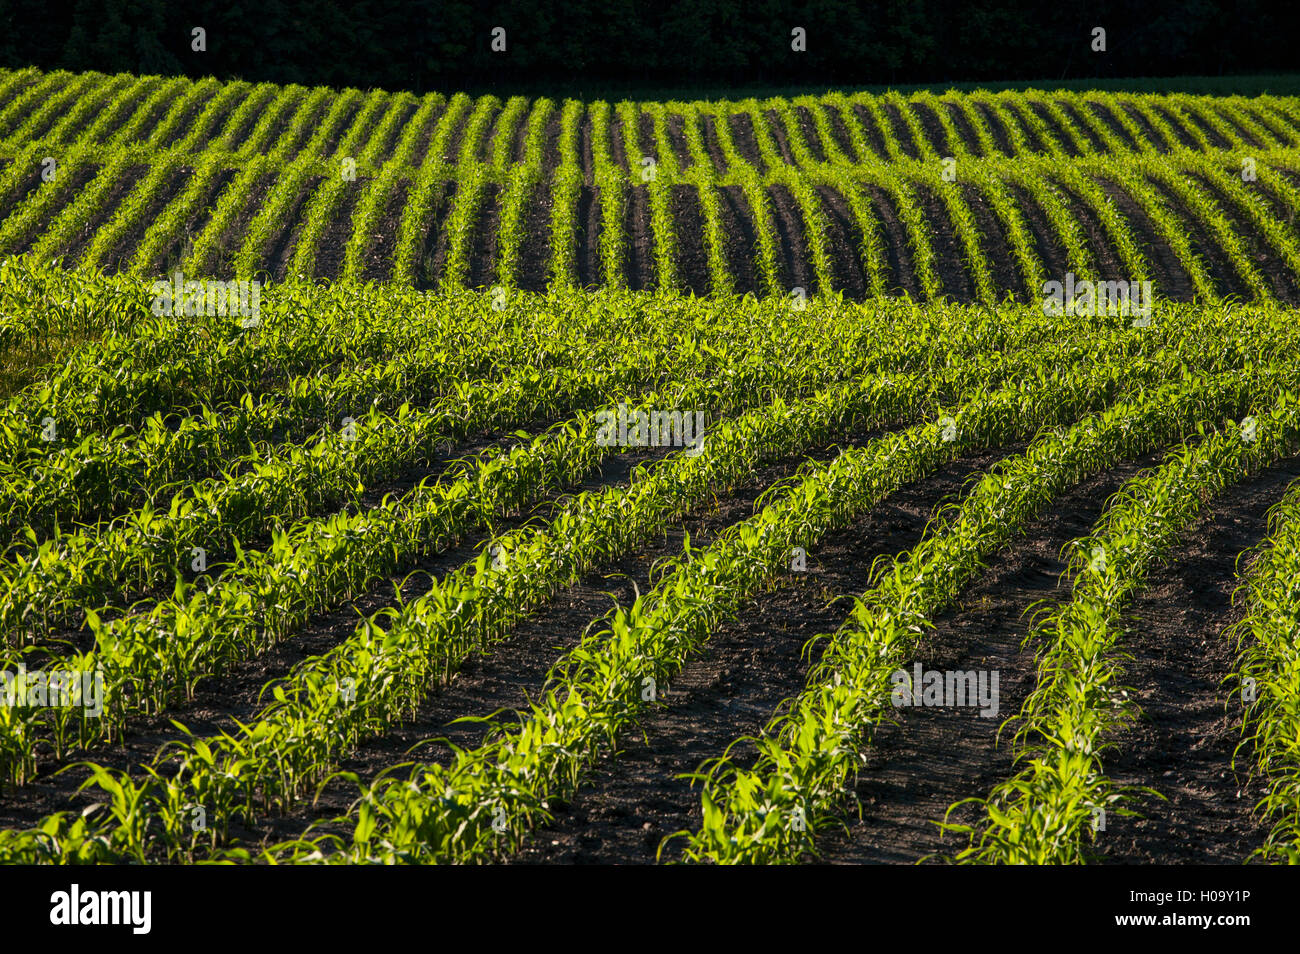 Corn field early growth, Eastern Townships, Canada Stock Photo